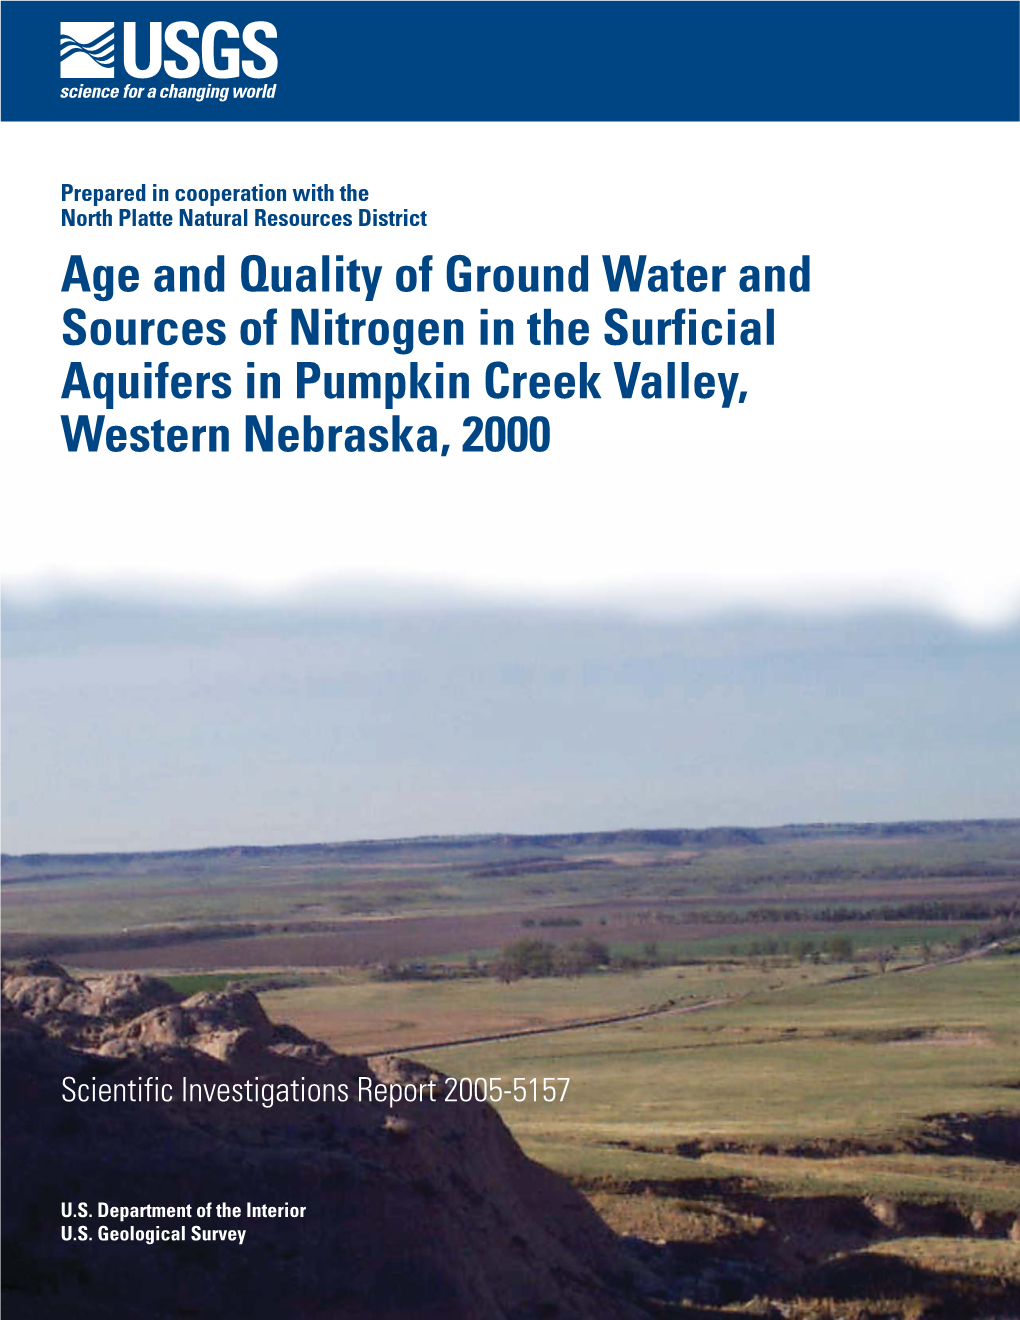 Age and Quality of Ground Water and Sources of Nitrogen in the Surficial Aquifers in Pumpkin Creek Valley, Western Nebraska, 2000